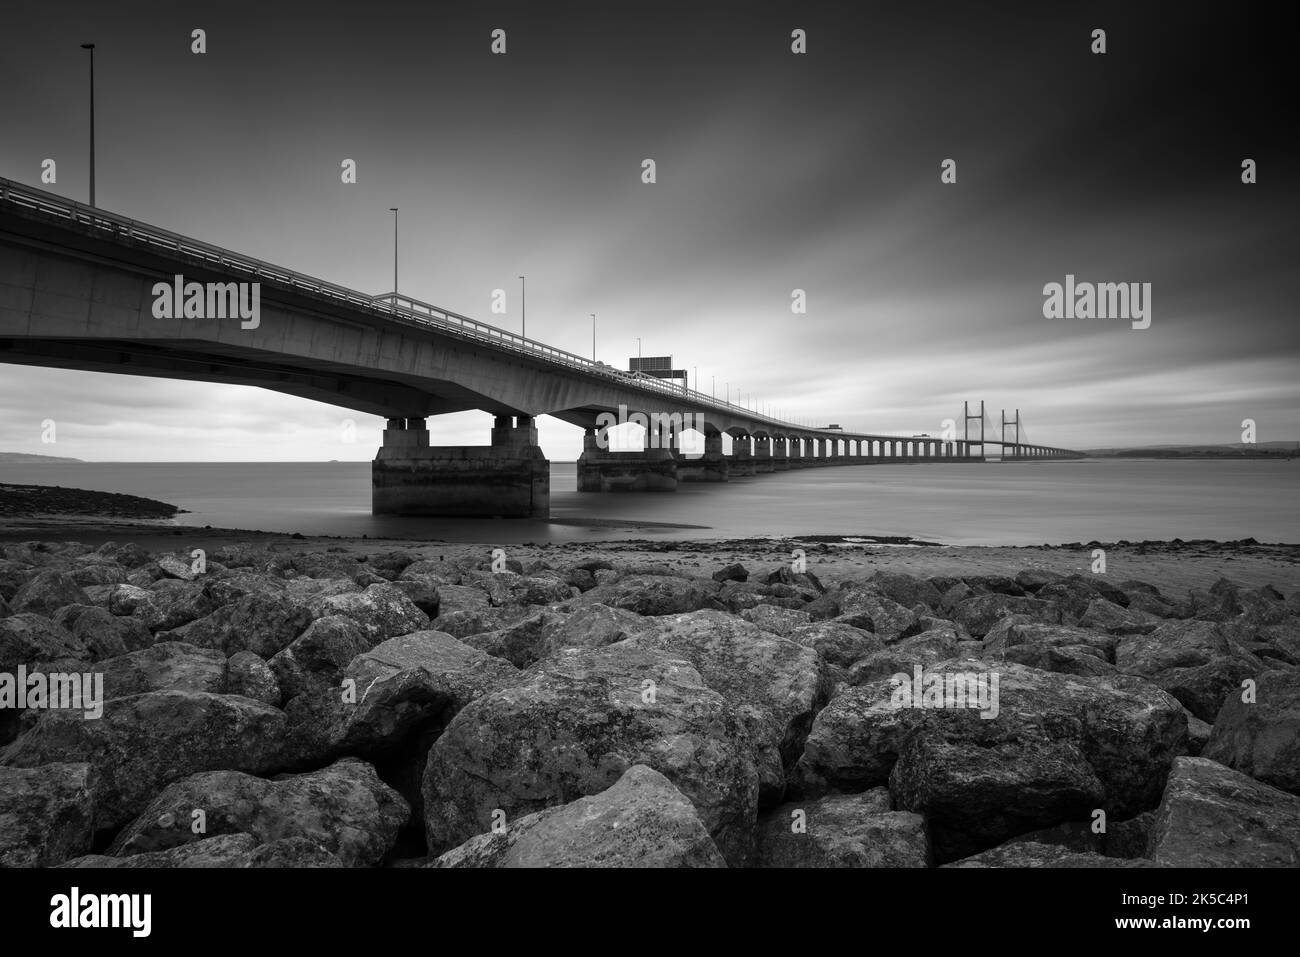 A black and white photograph of the Prince of Wales Bridge between England and Wales over the Severn Estuary from Severn Beach, Gloucestershire, England. Stock Photo